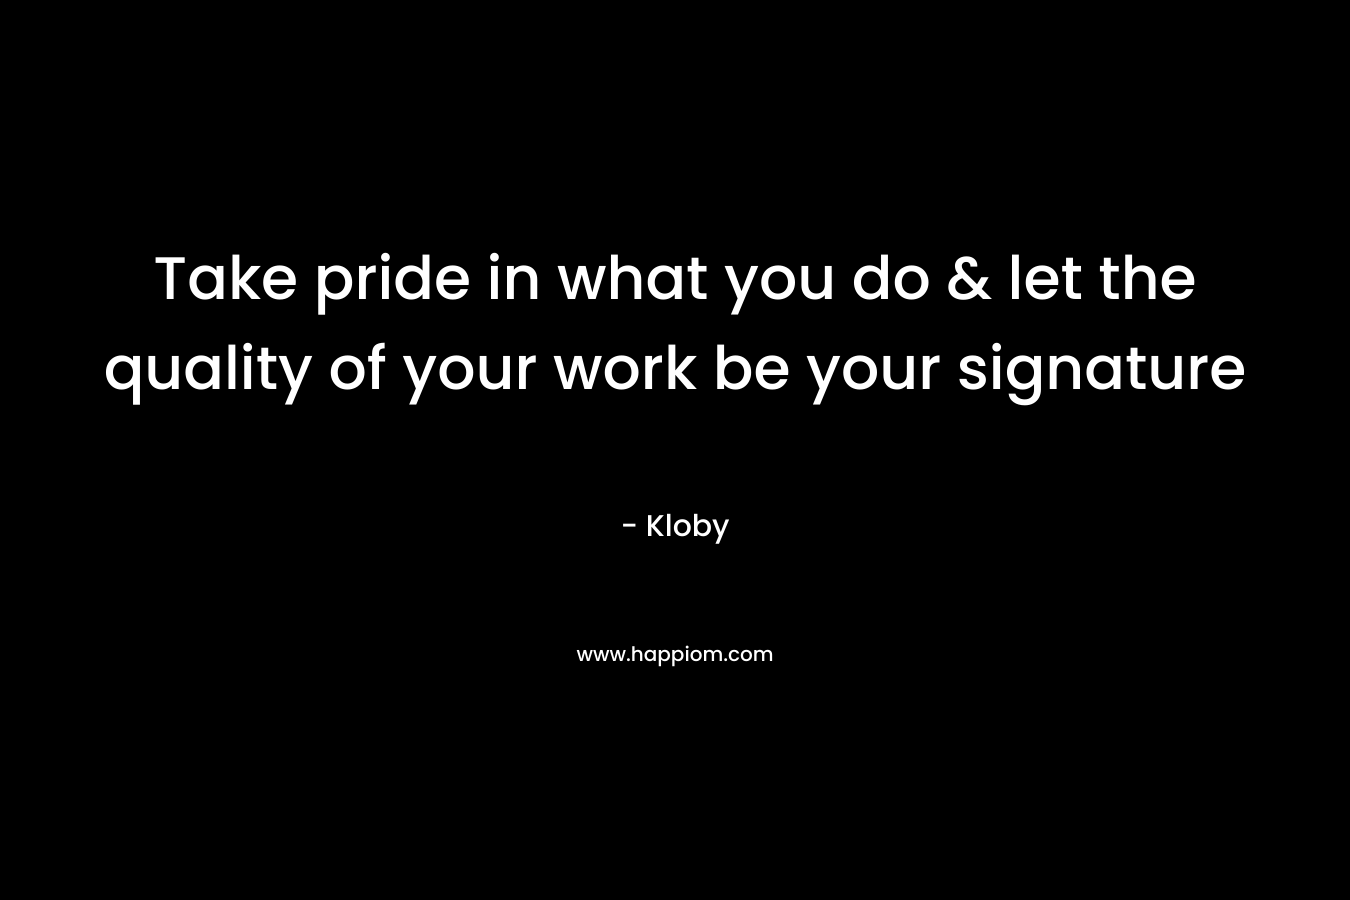 Take pride in what you do & let the quality of your work be your signature